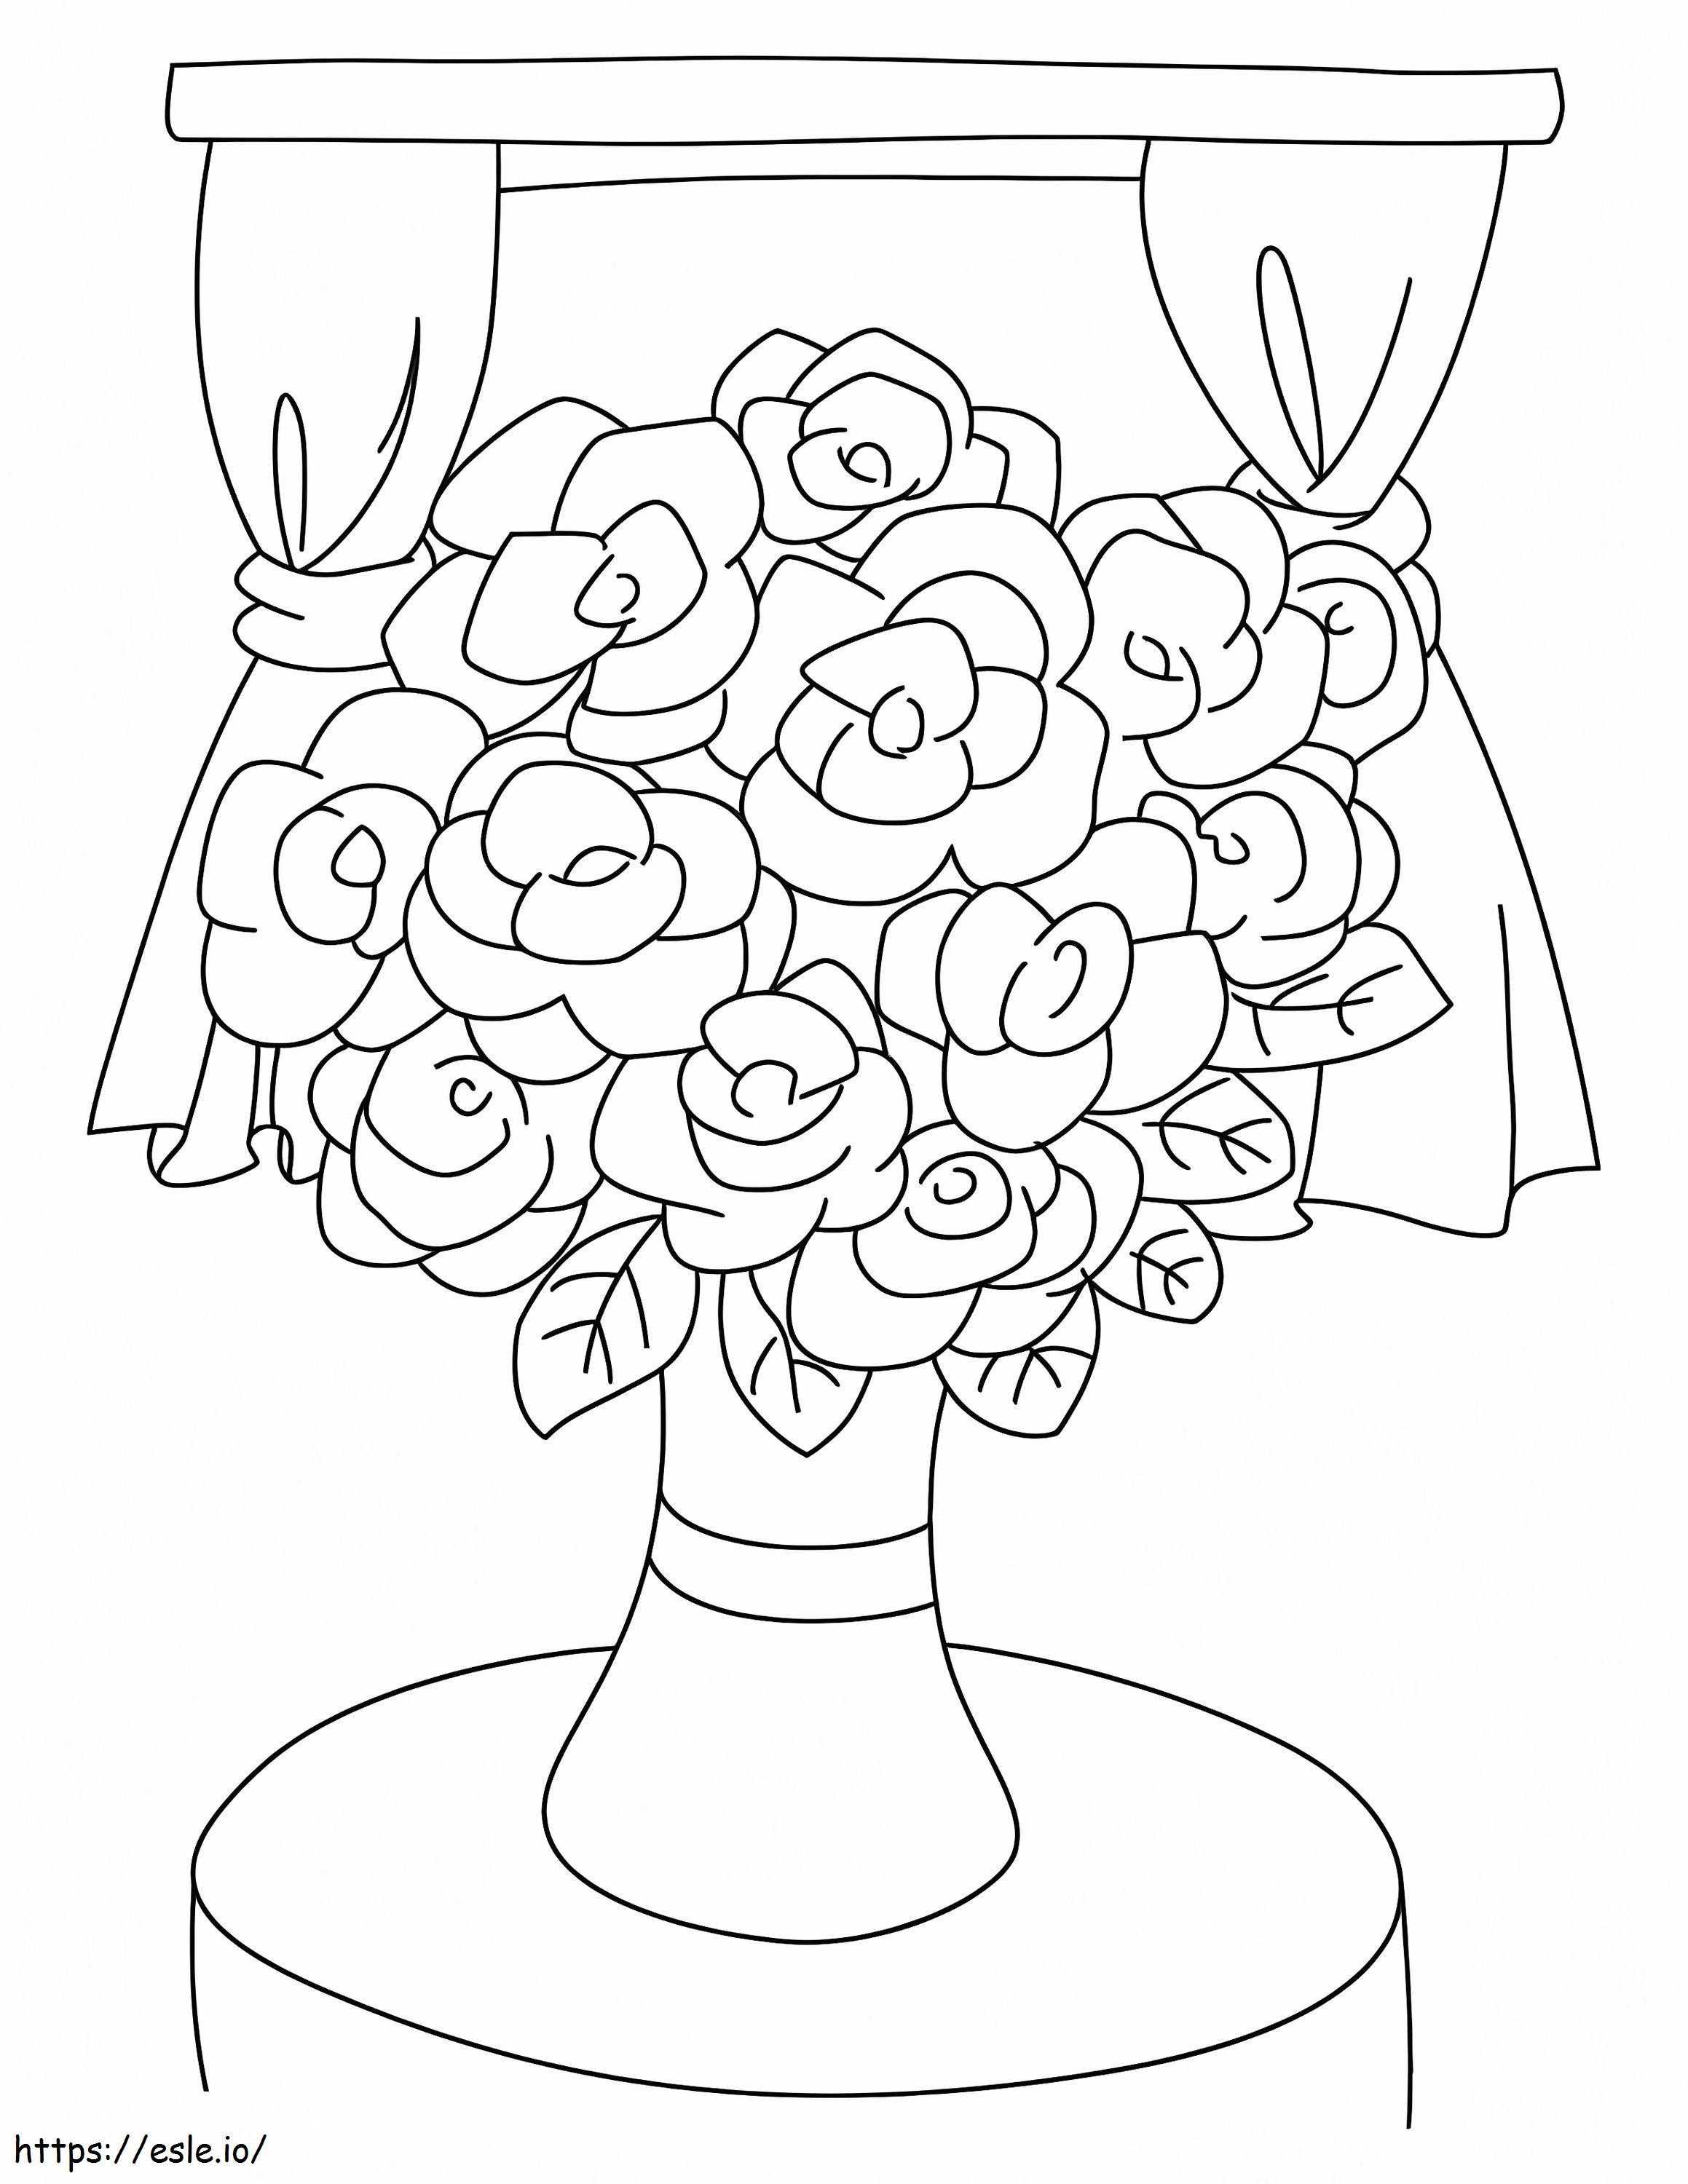 Gardenia At Home coloring page